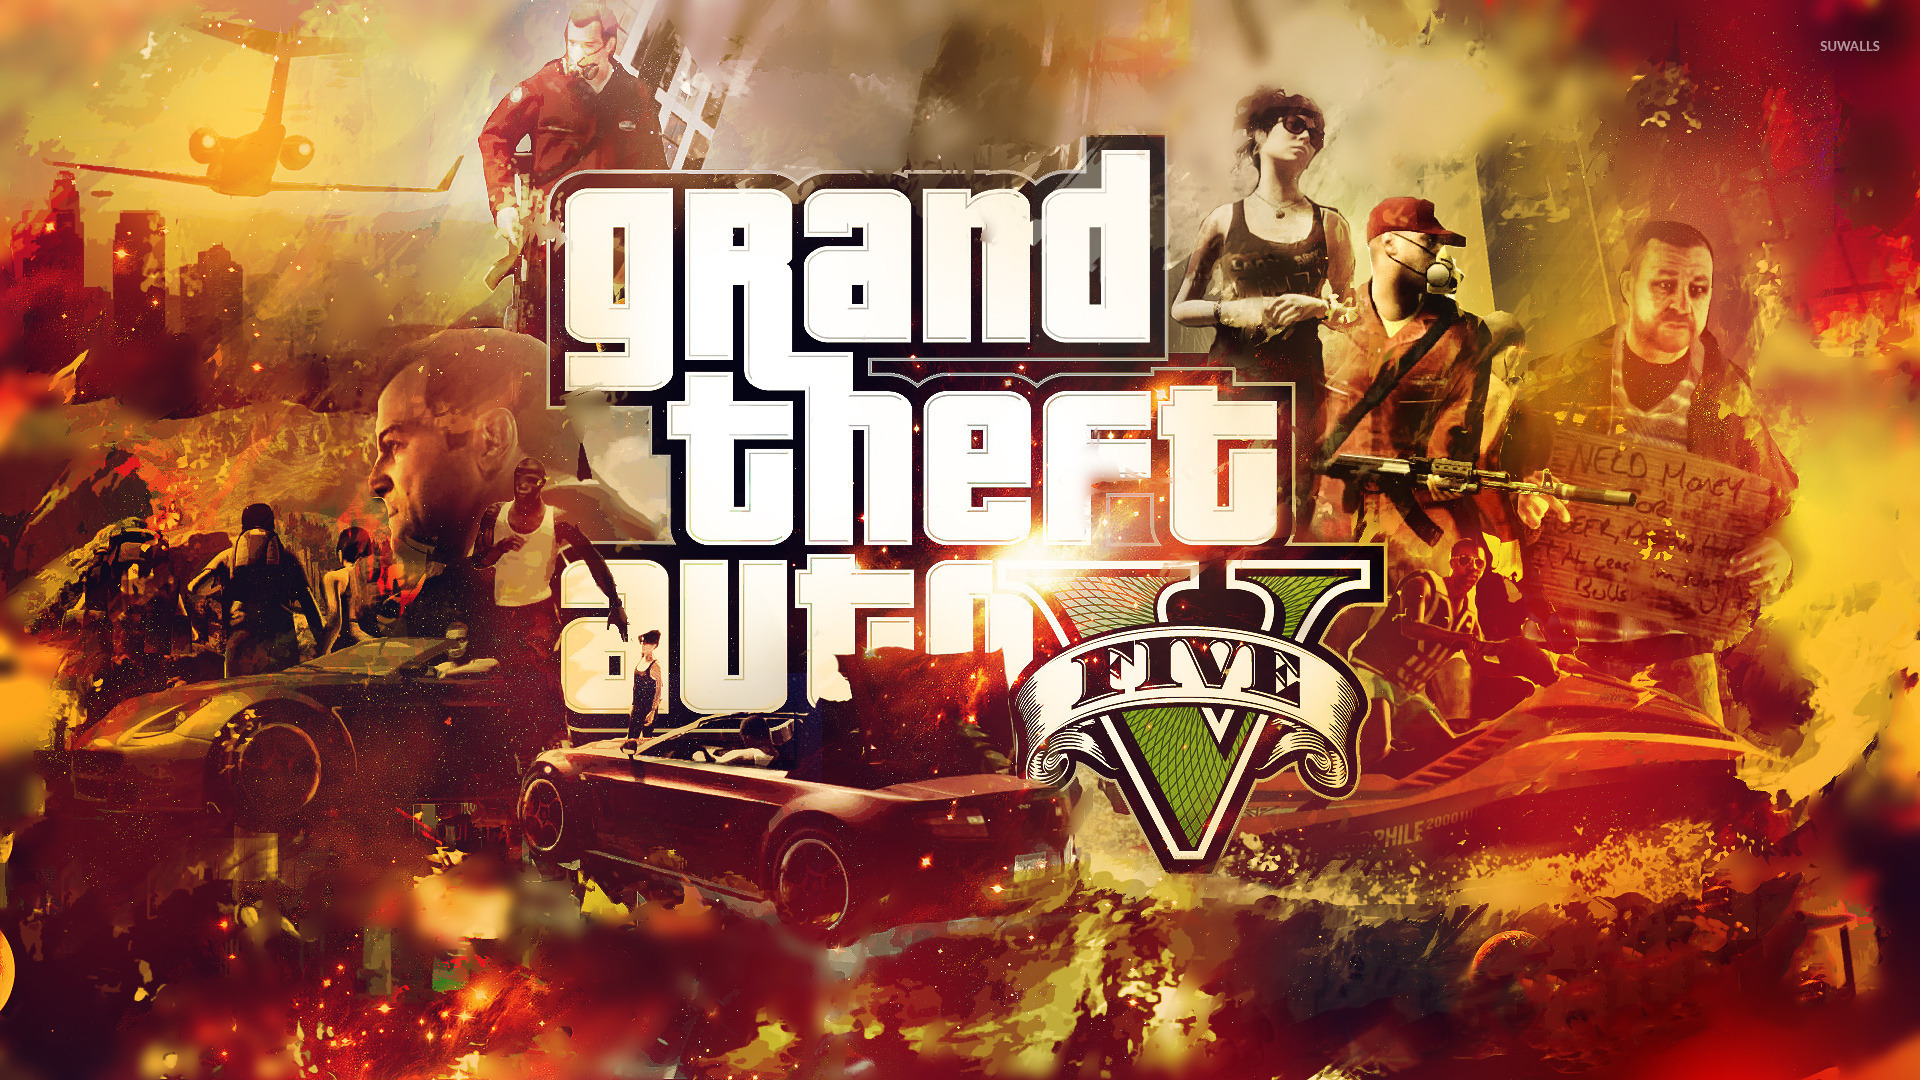 gta 5 wallpaper for pc,action adventure game,games,font,movie,strategy video game